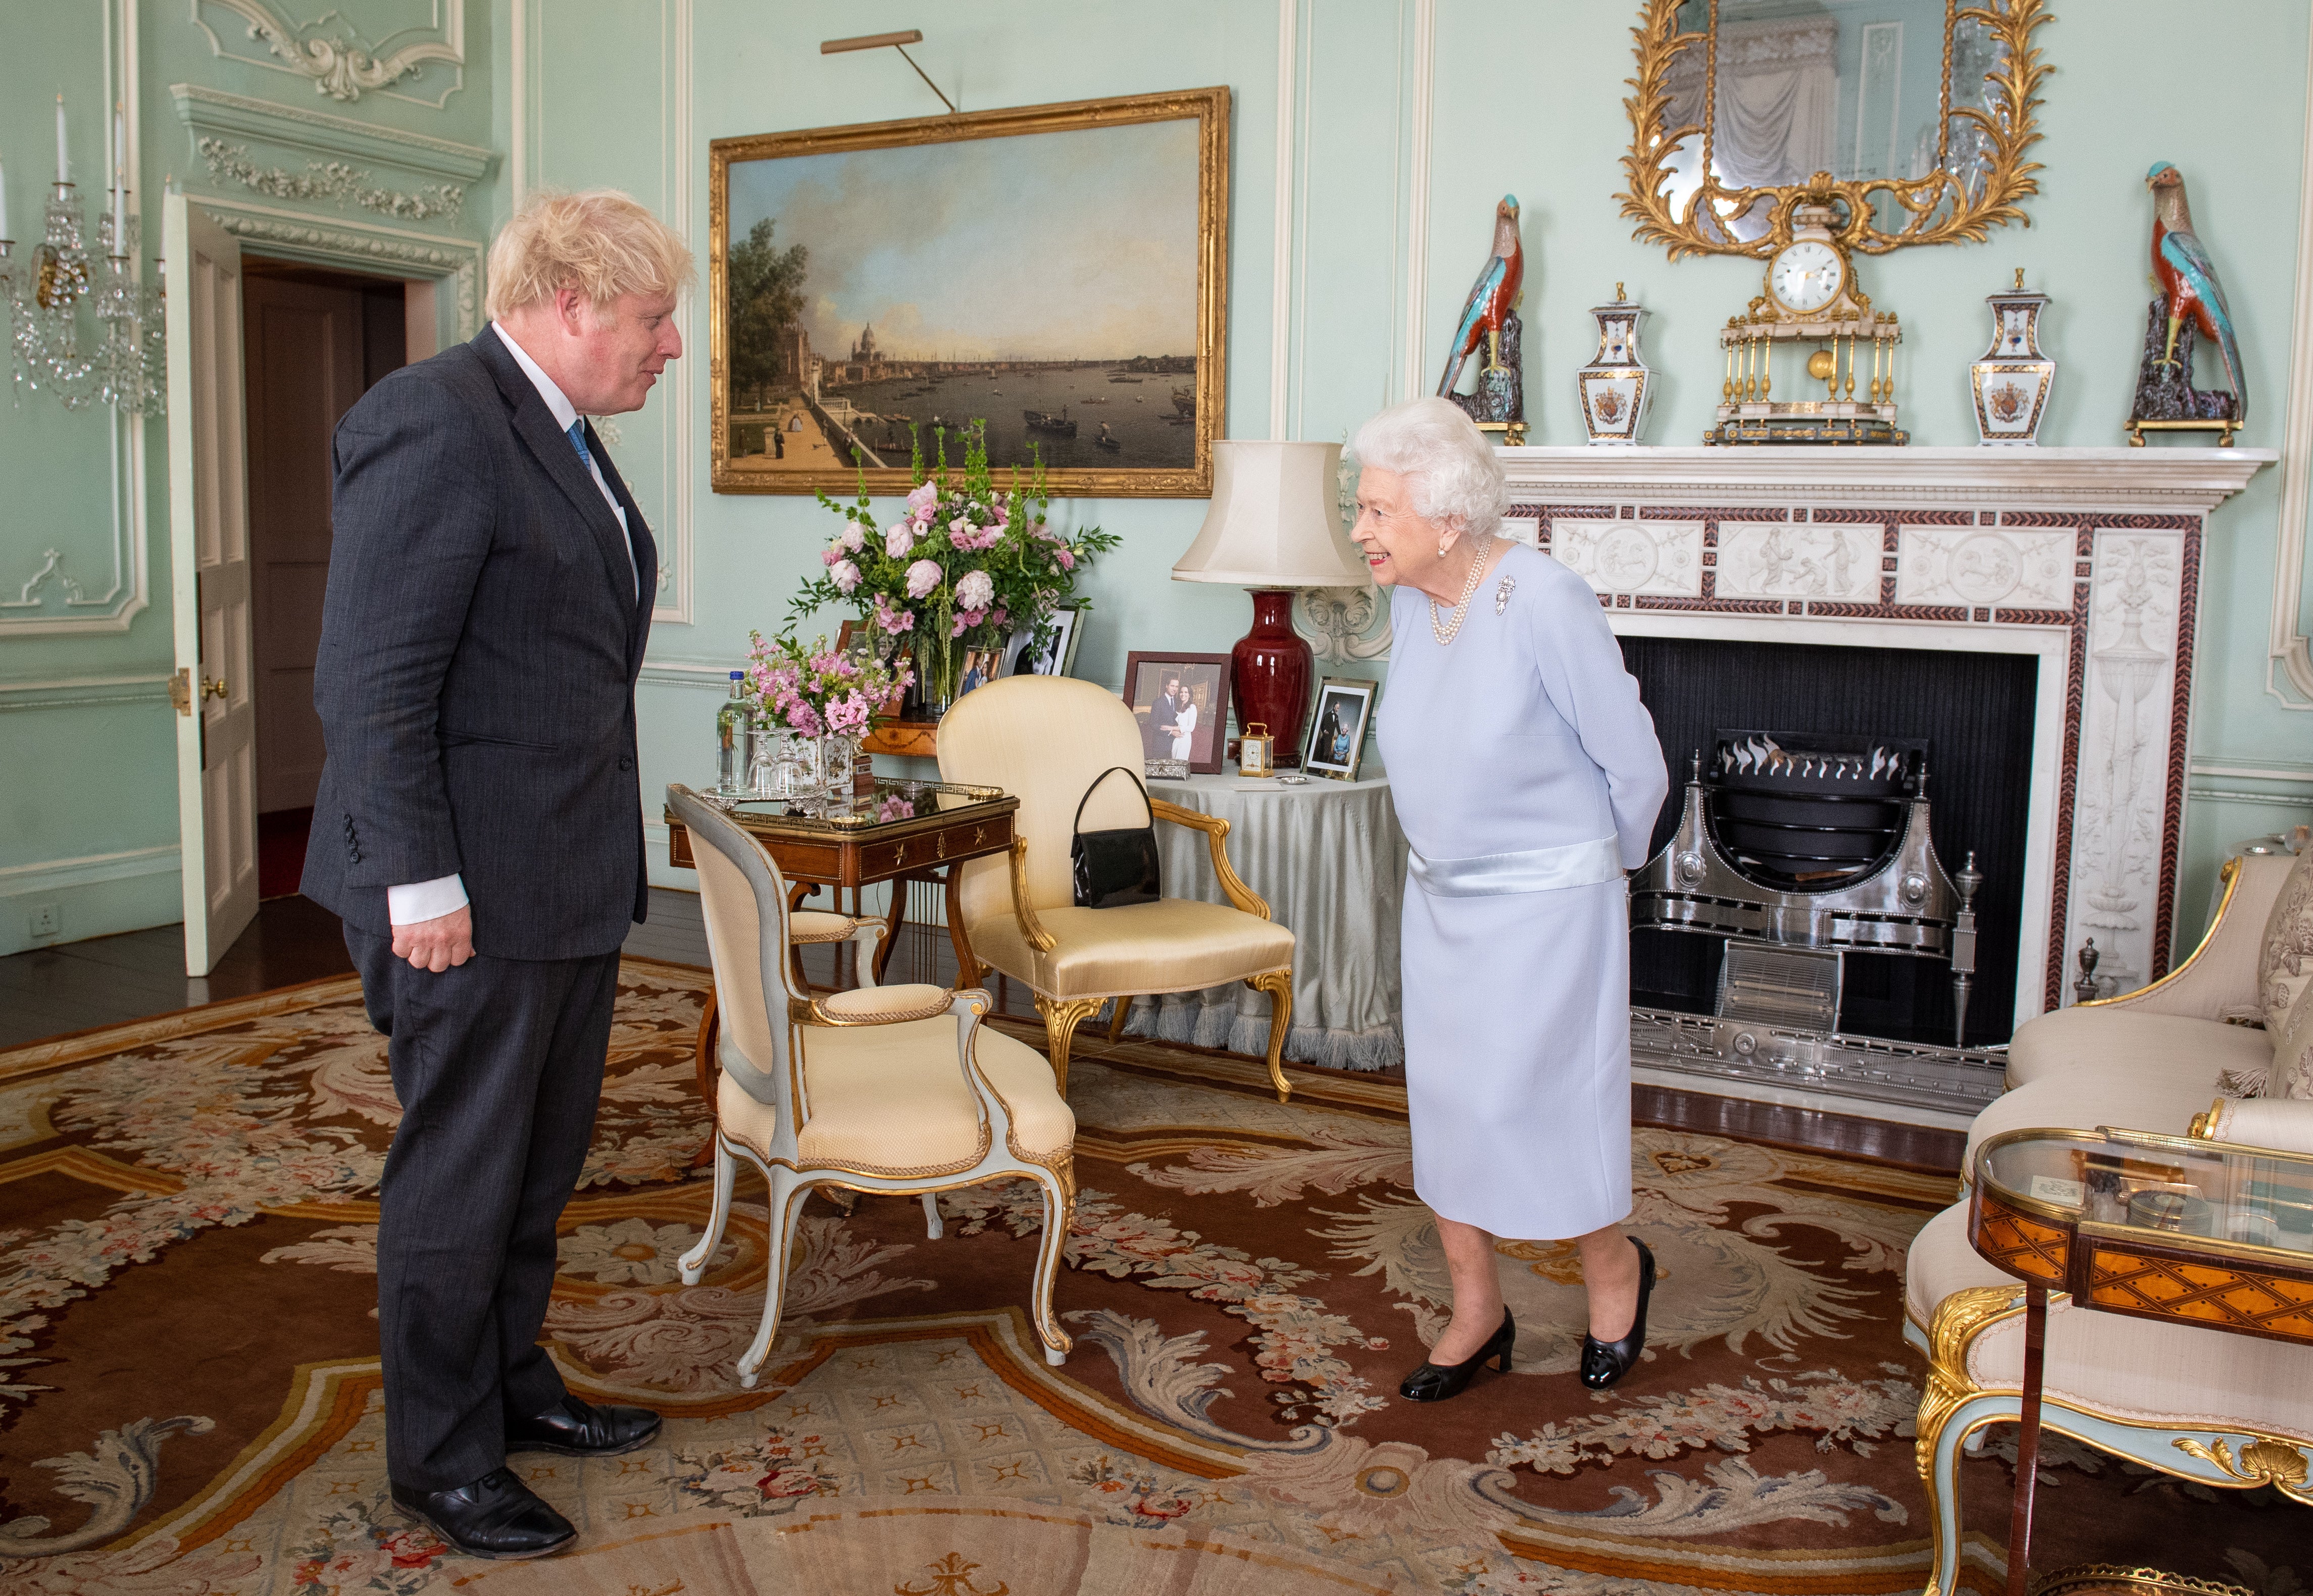 Boris Johnson during his audience with the Queen at Buckingham Palace earlier in his premiership (PA)